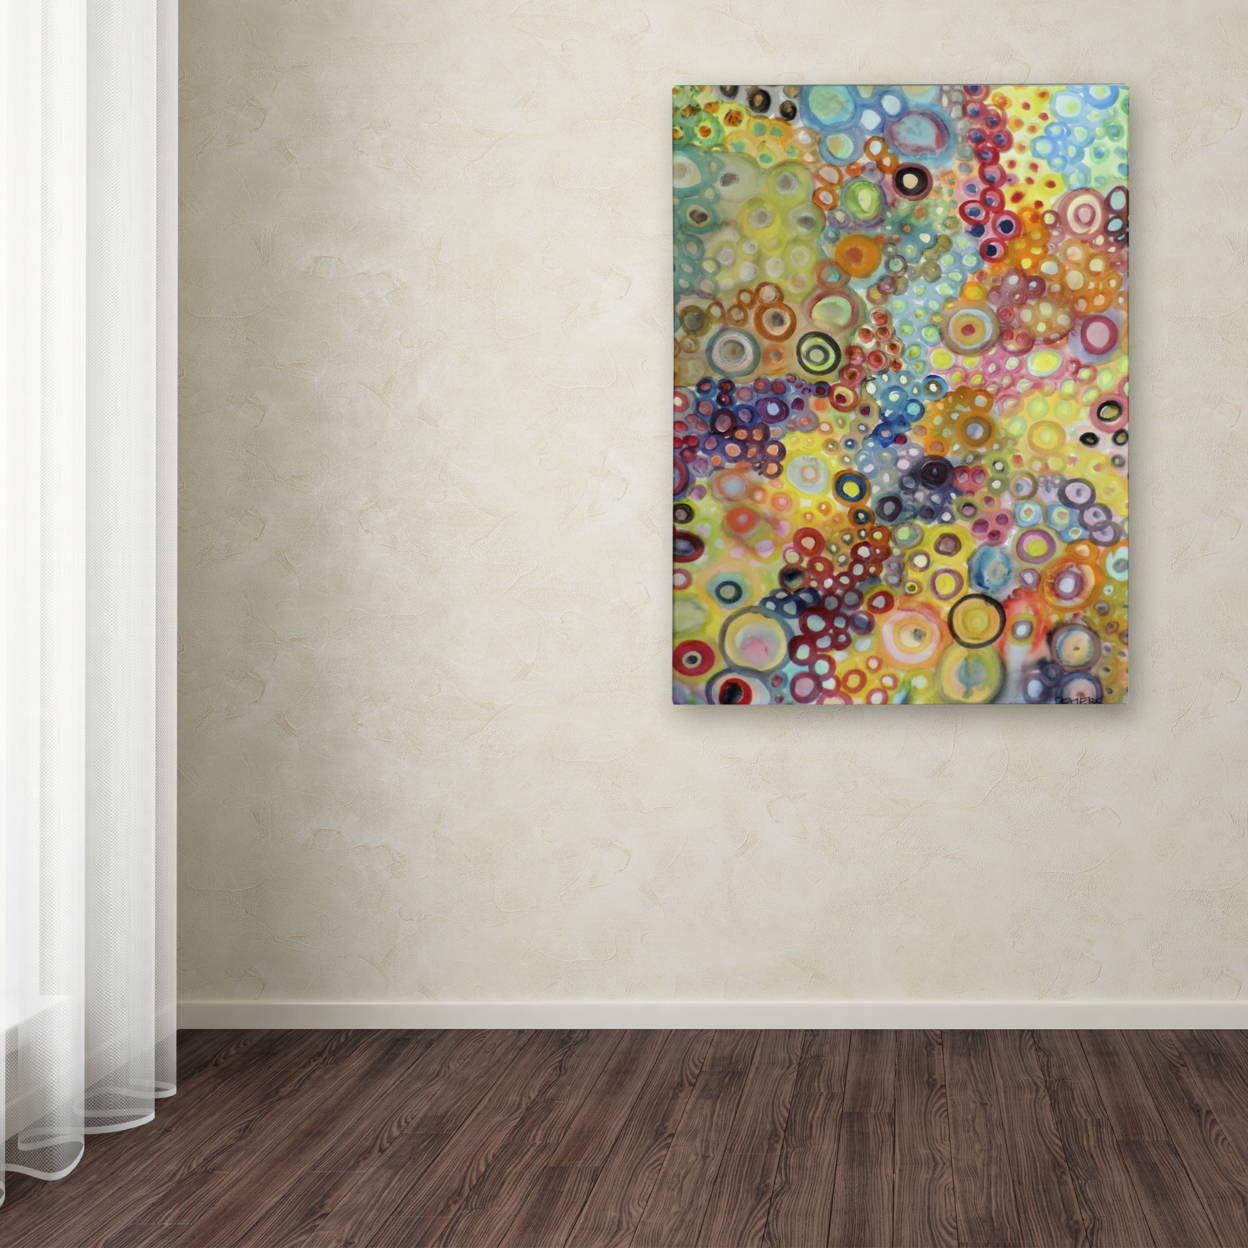 Sylvie Demers 'Cellulaires' Canvas Wall Art 35 X 47 Inches